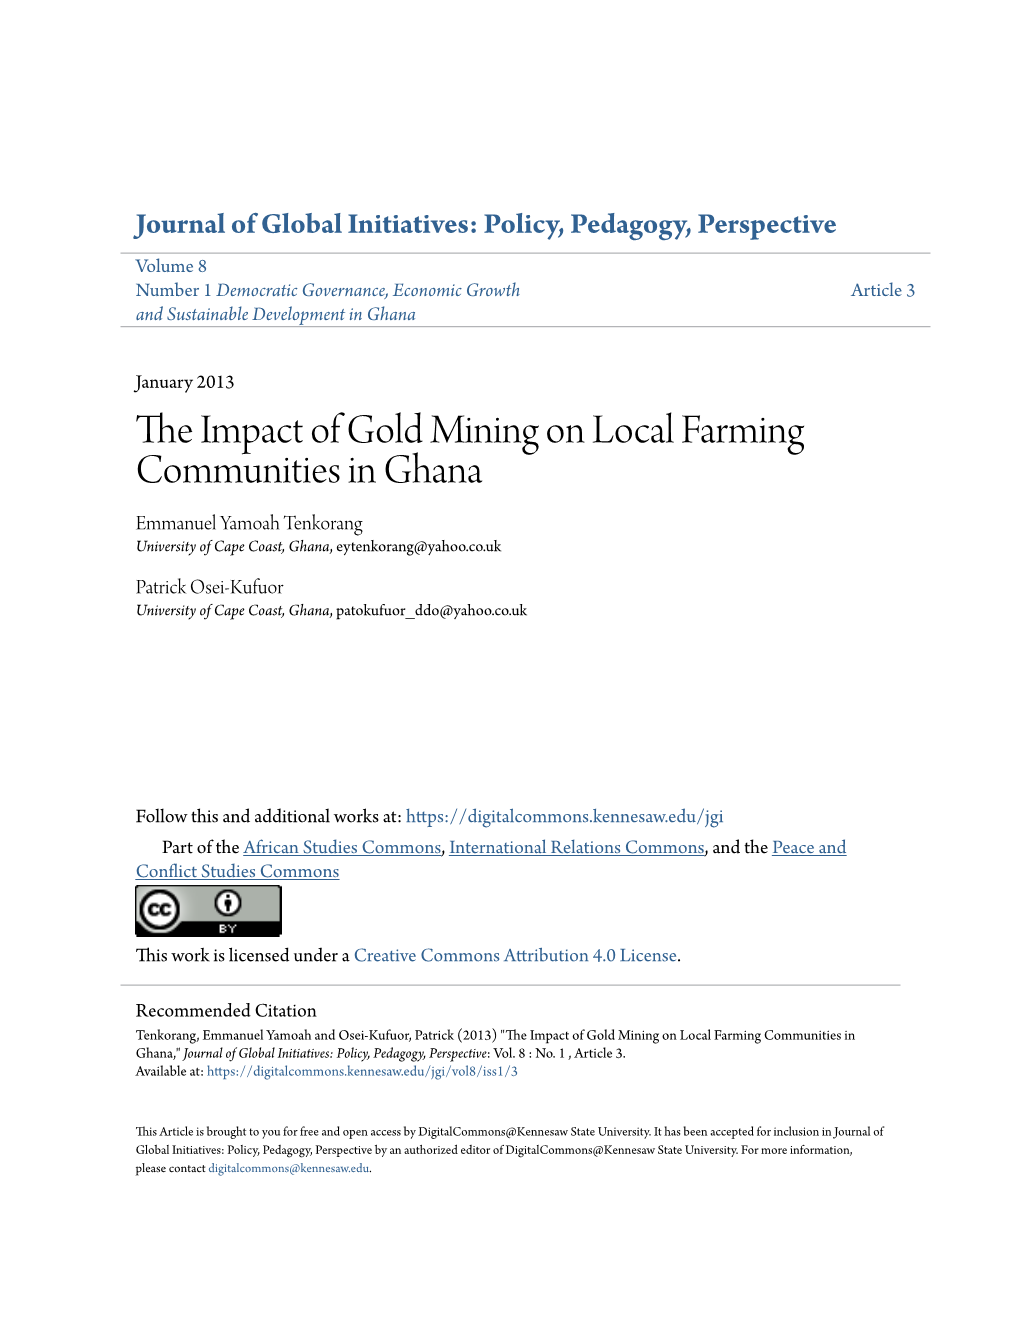 The Impact of Gold Mining on Local Farming Communities in Ghana